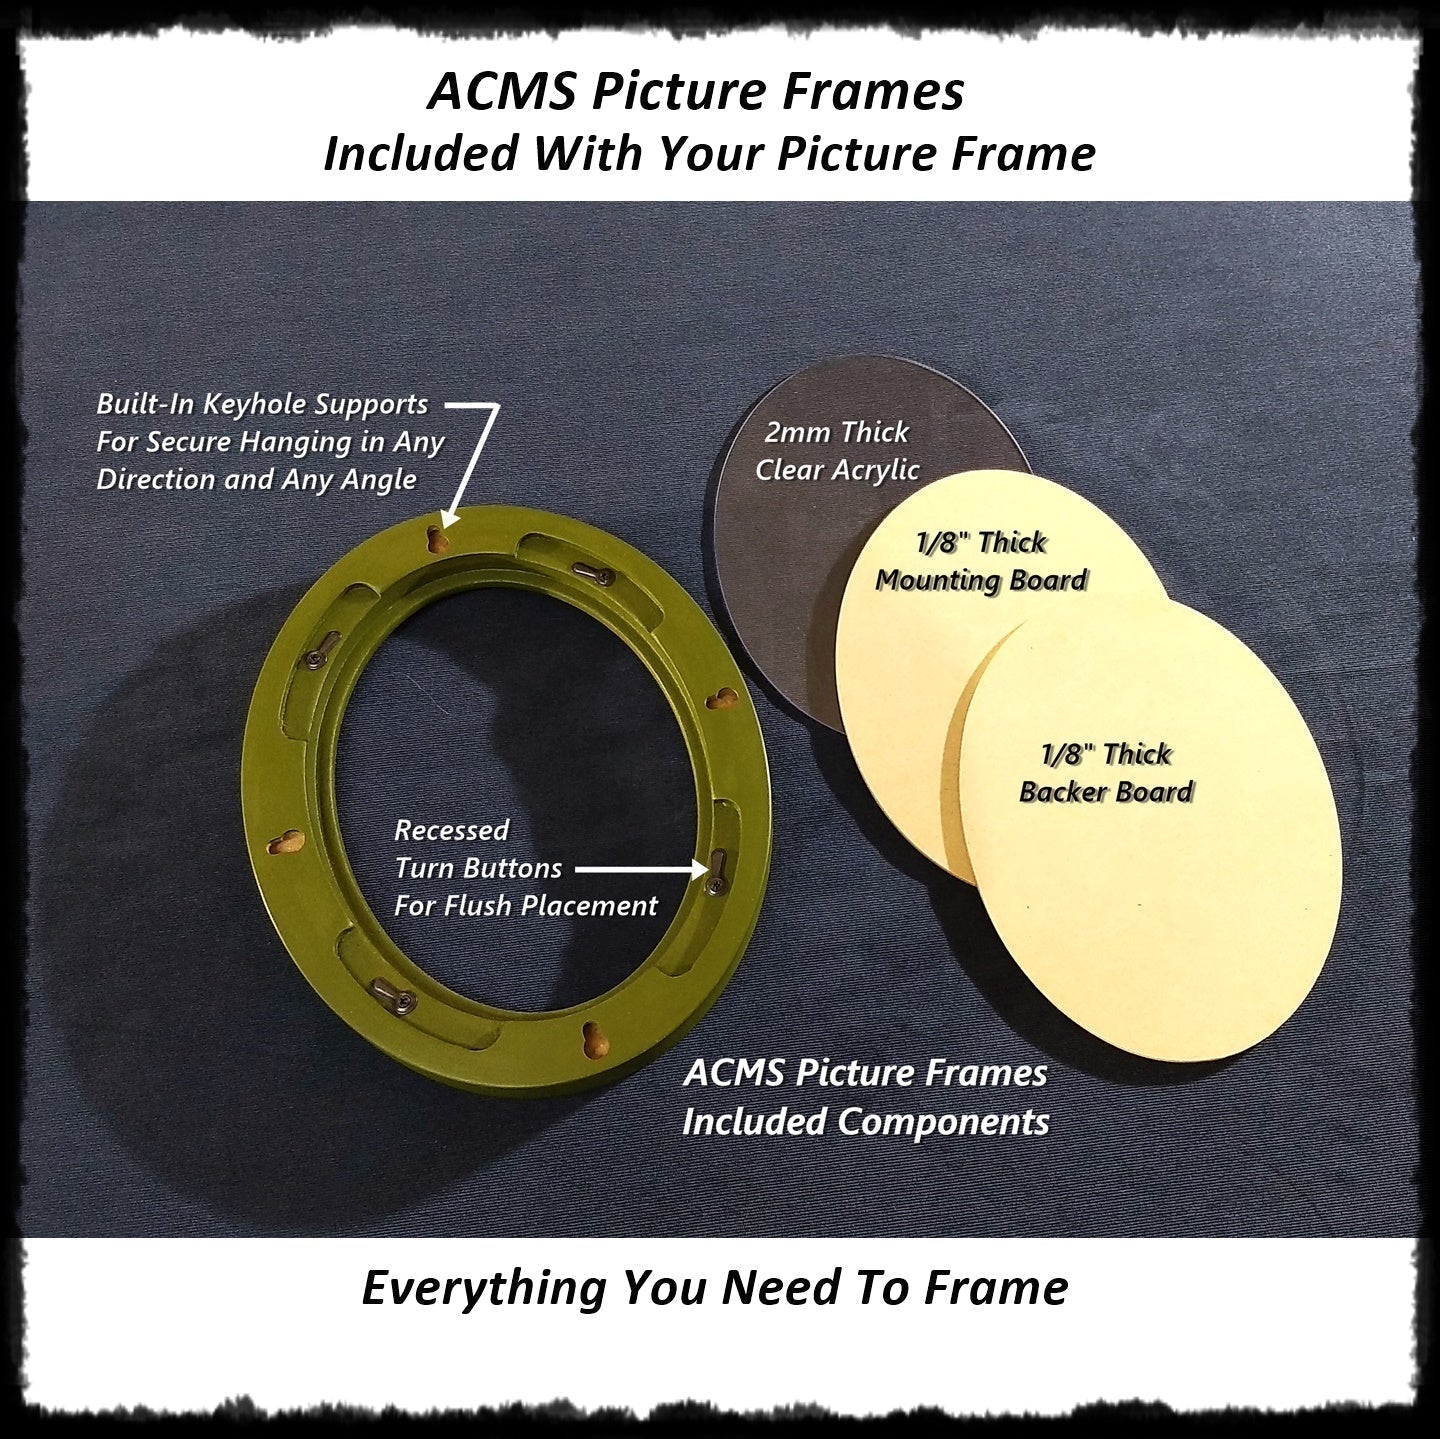 Oval Picture Frame - Reverse Taper Profile - 1.25" Frame Width